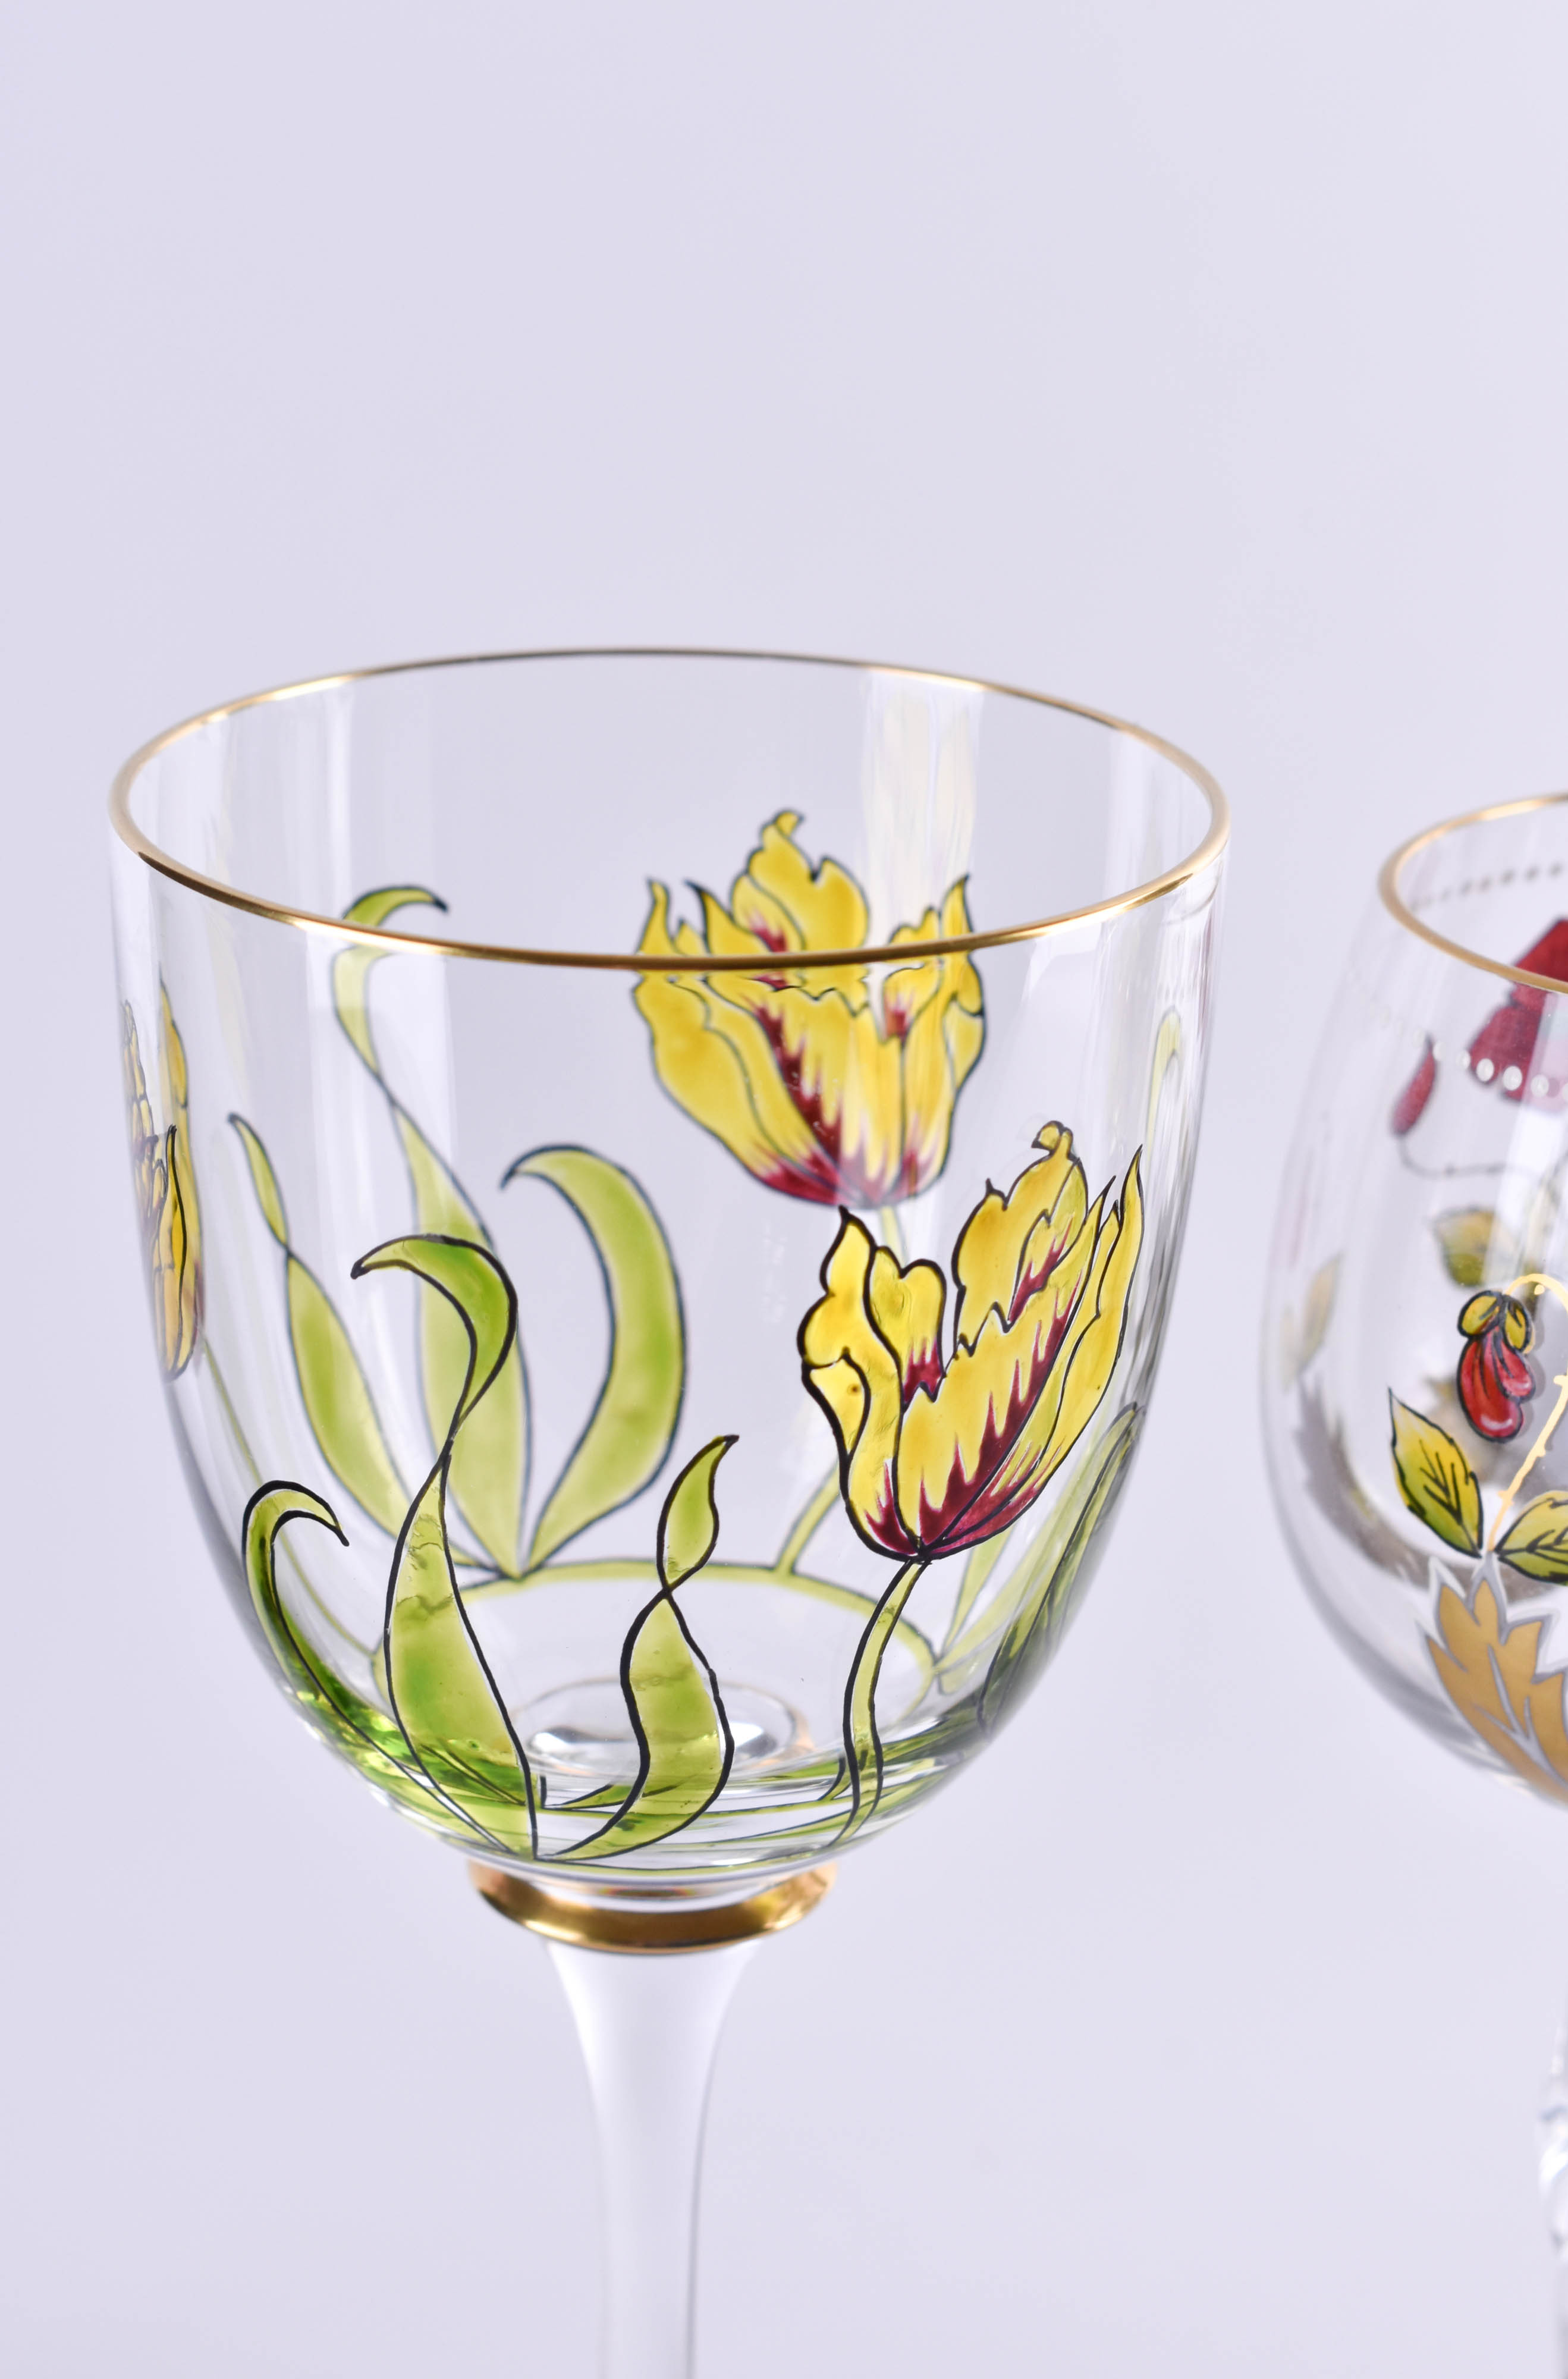 4 Theresienthal wine glasses - Image 2 of 4